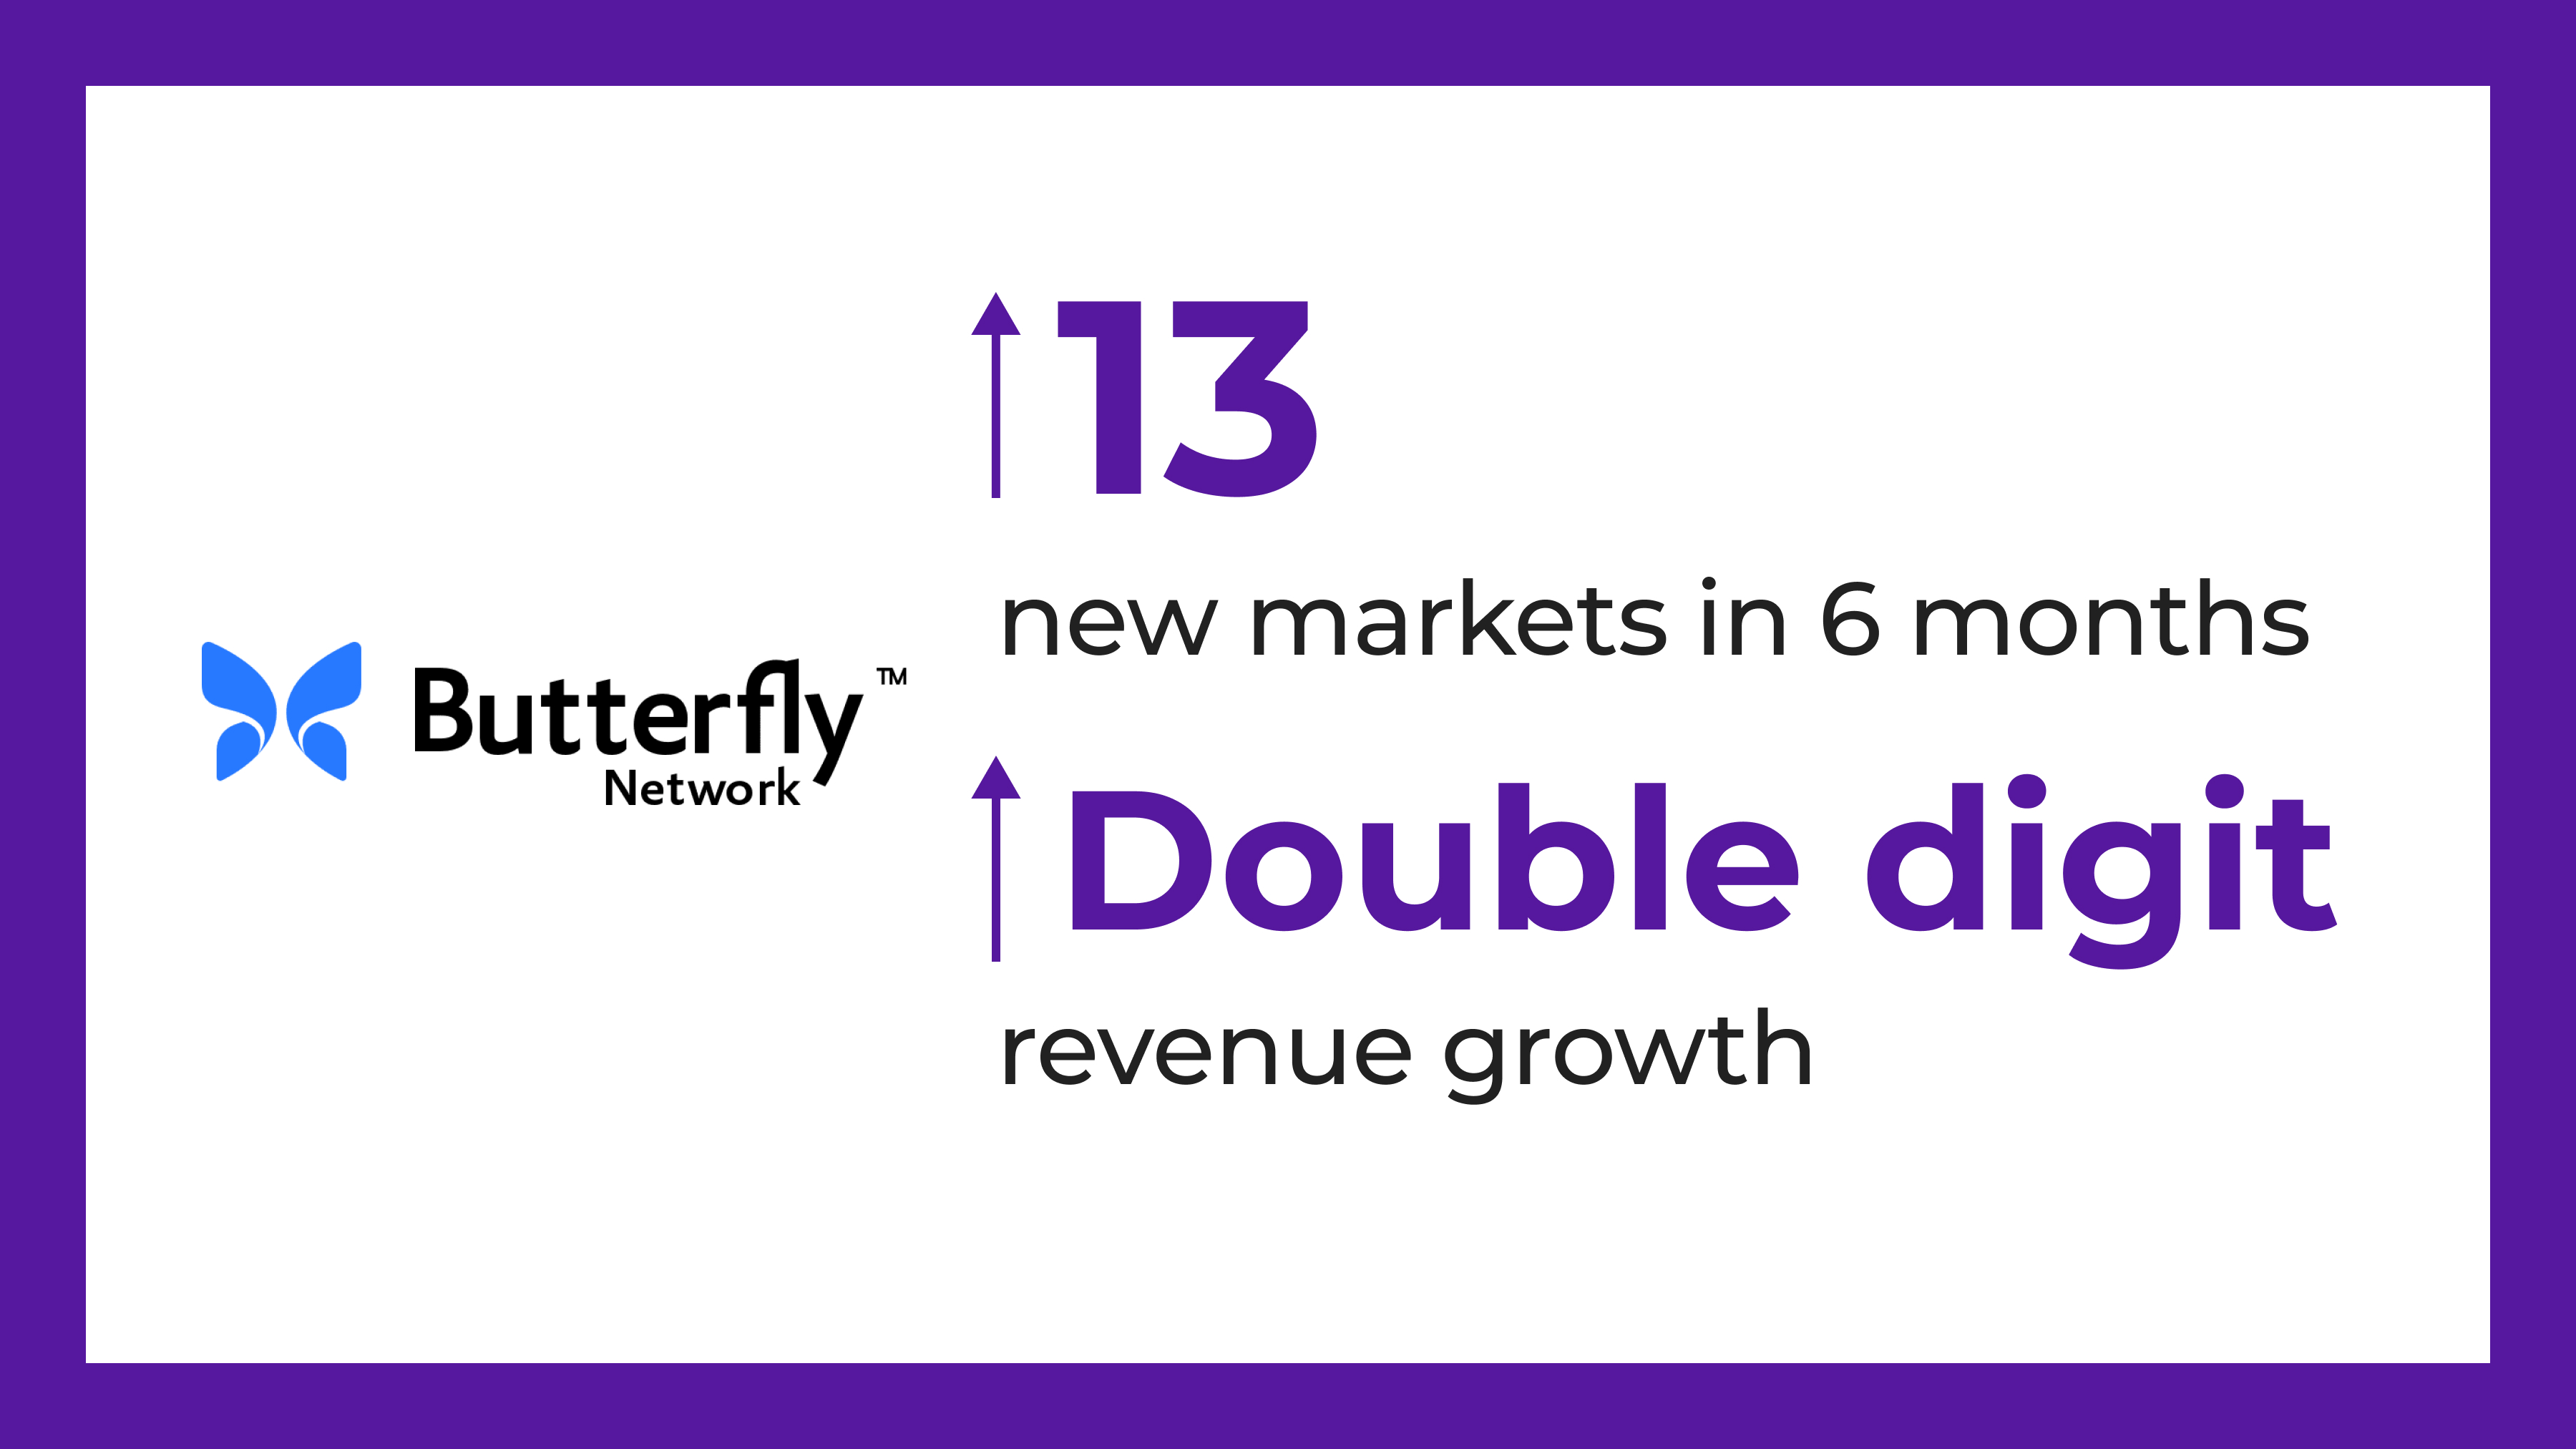 Butterfly Network: Achieving double digital revenue growth with translation